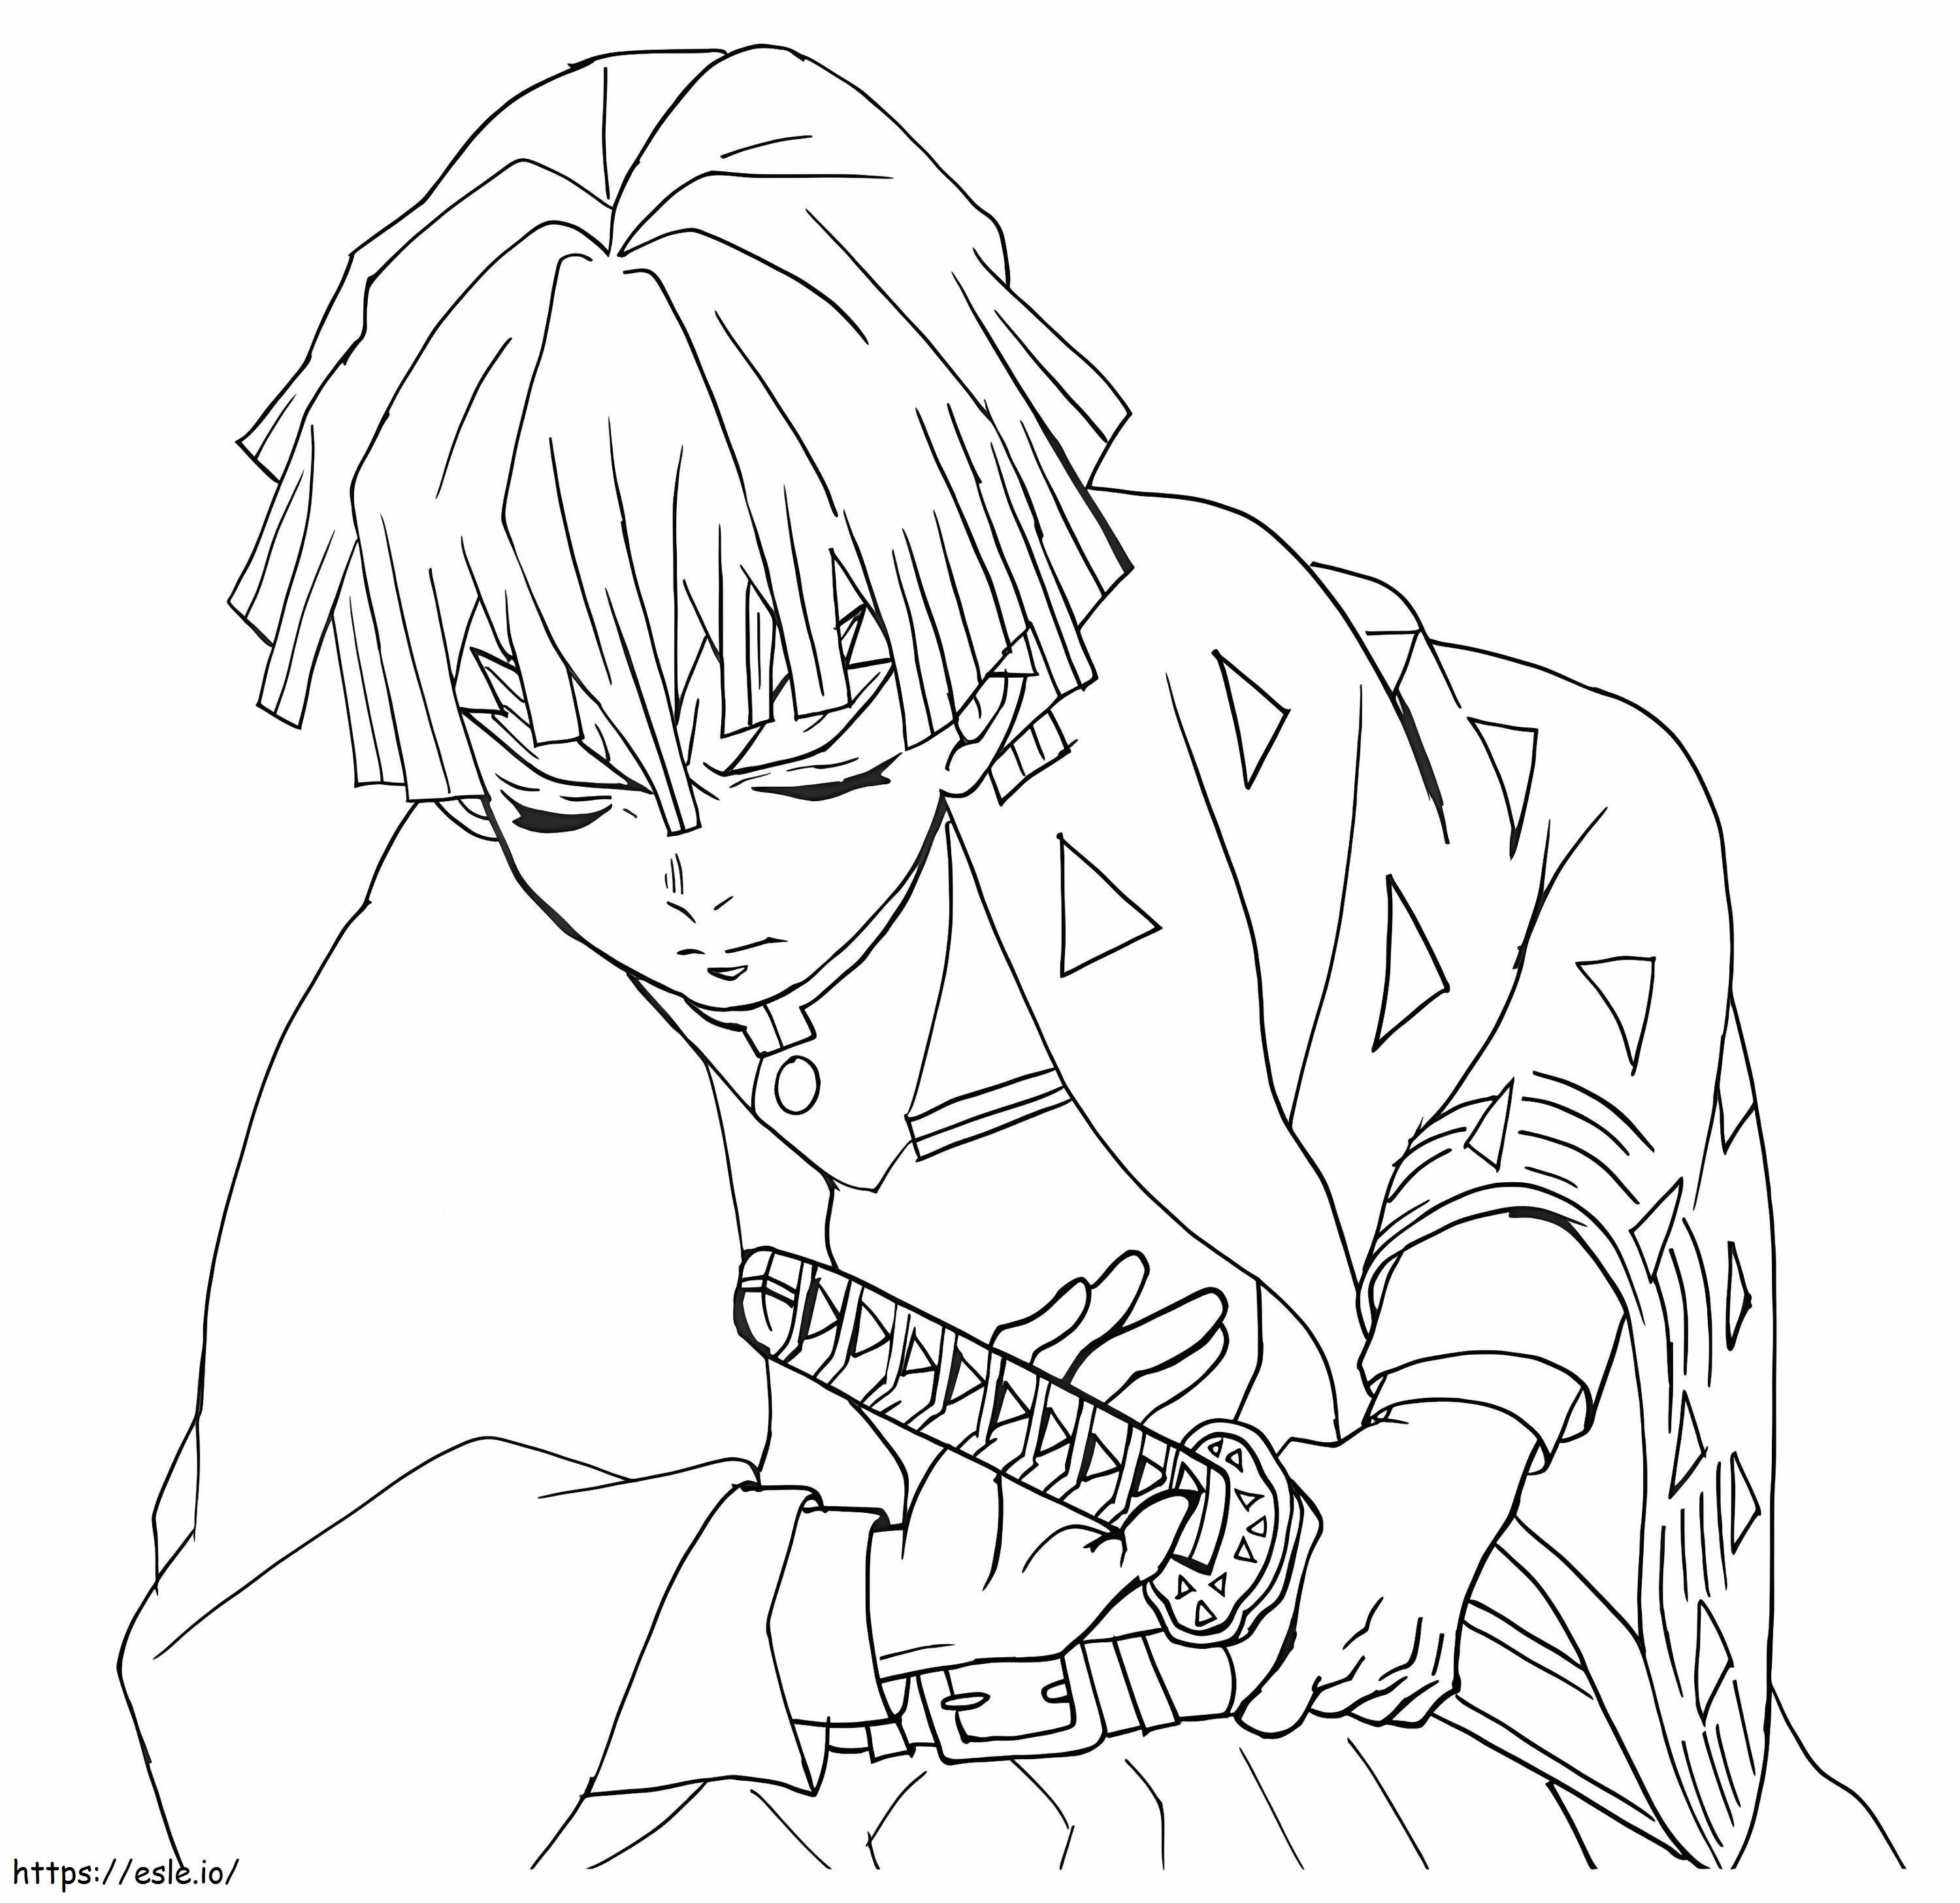 Angry Zenitsu coloring page